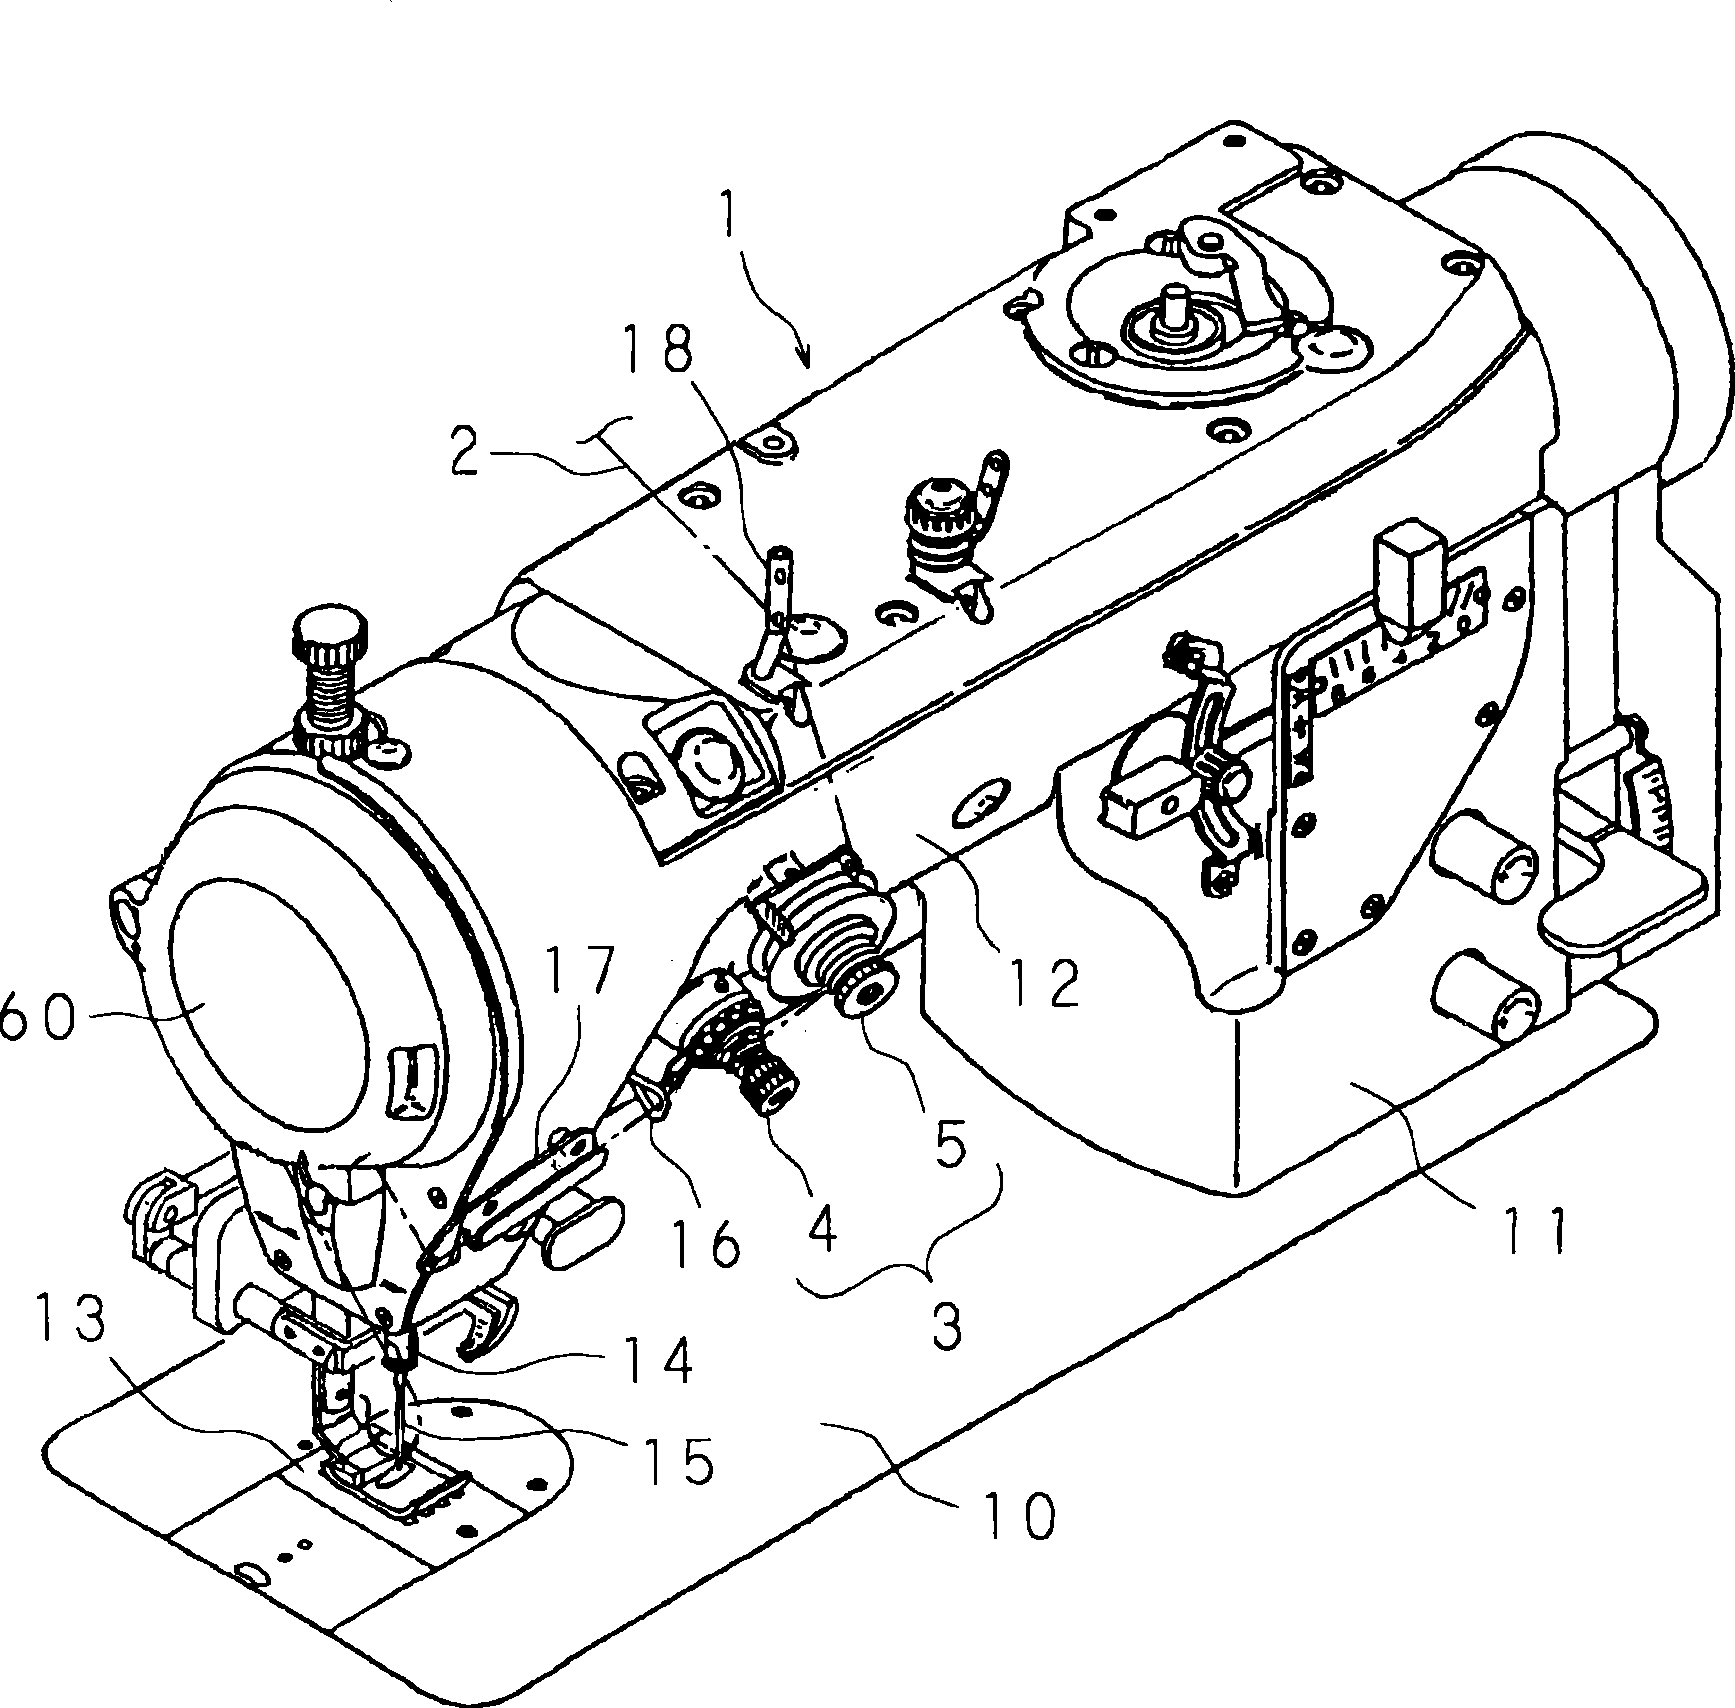 Thread adjusting device of sewing machine